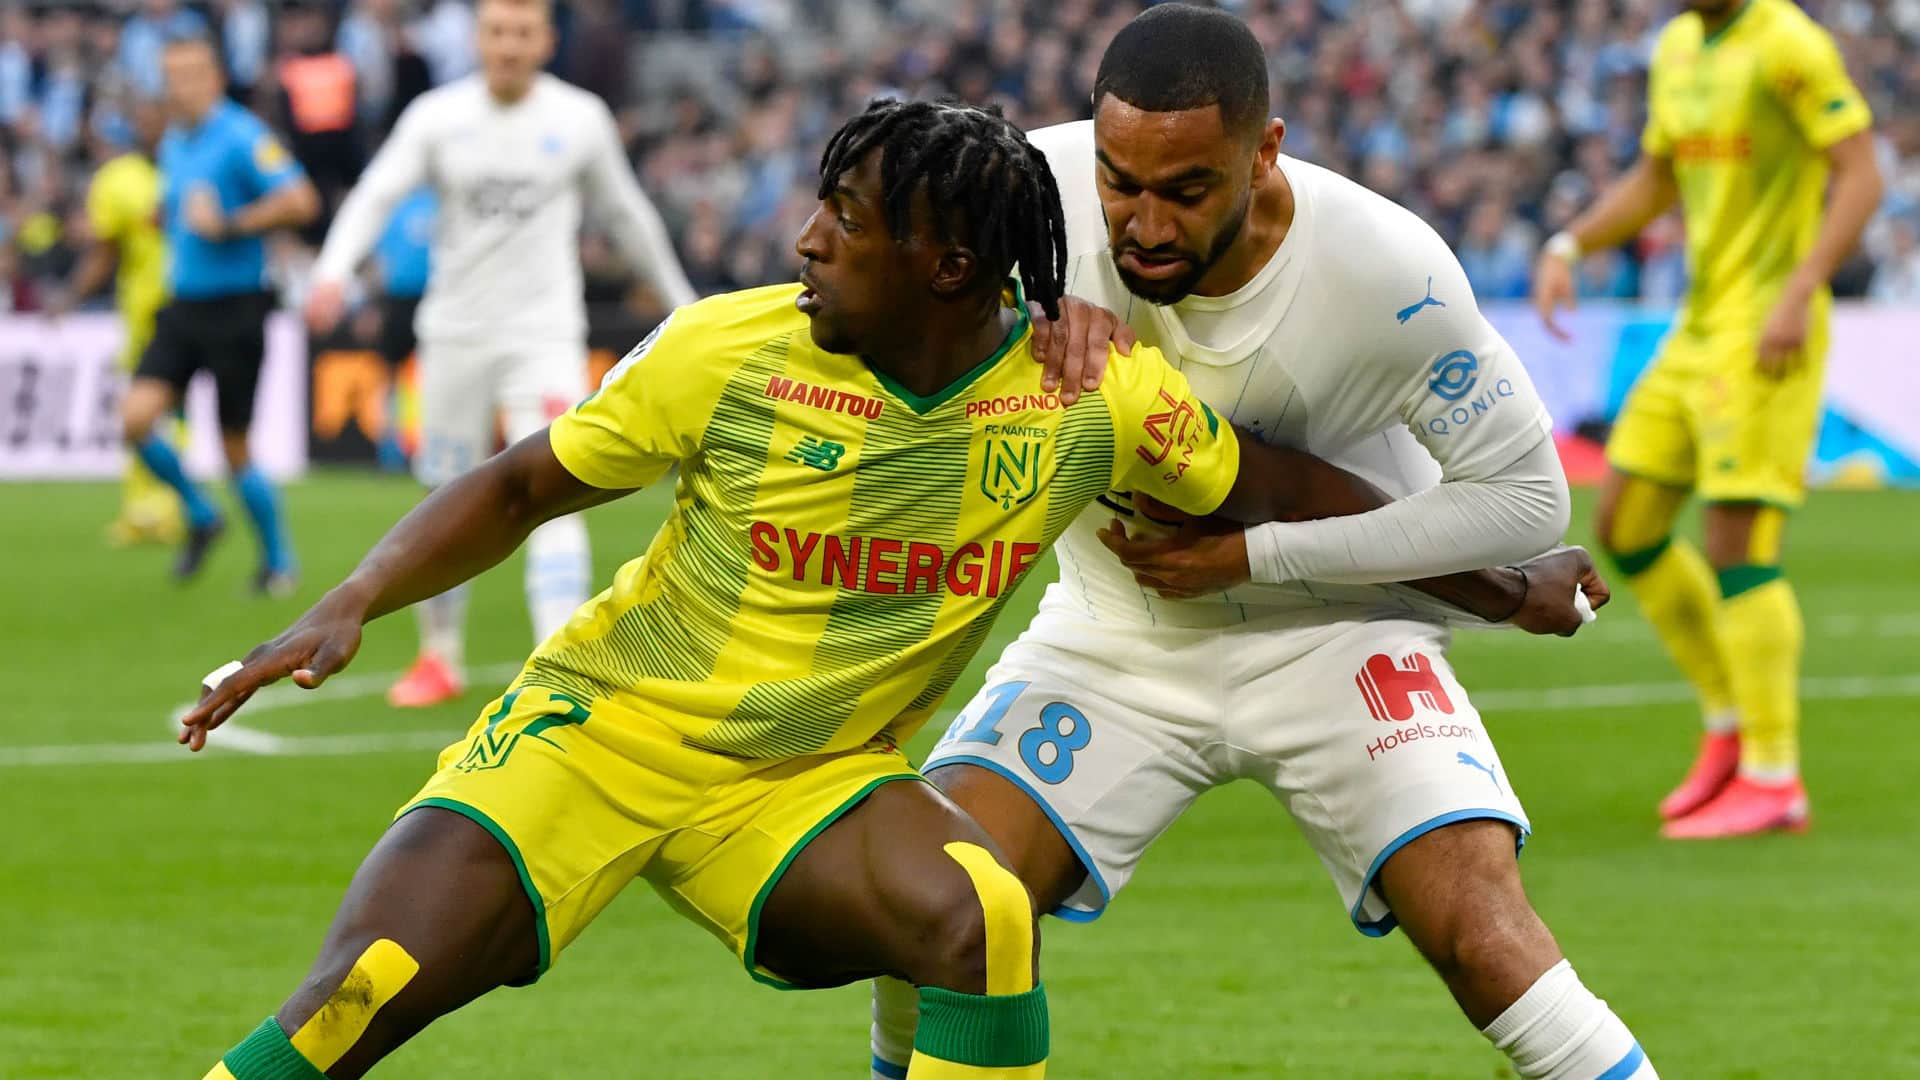 Marseille vs Nantes Preview, Tips and Odds - Sportingpedia - Latest